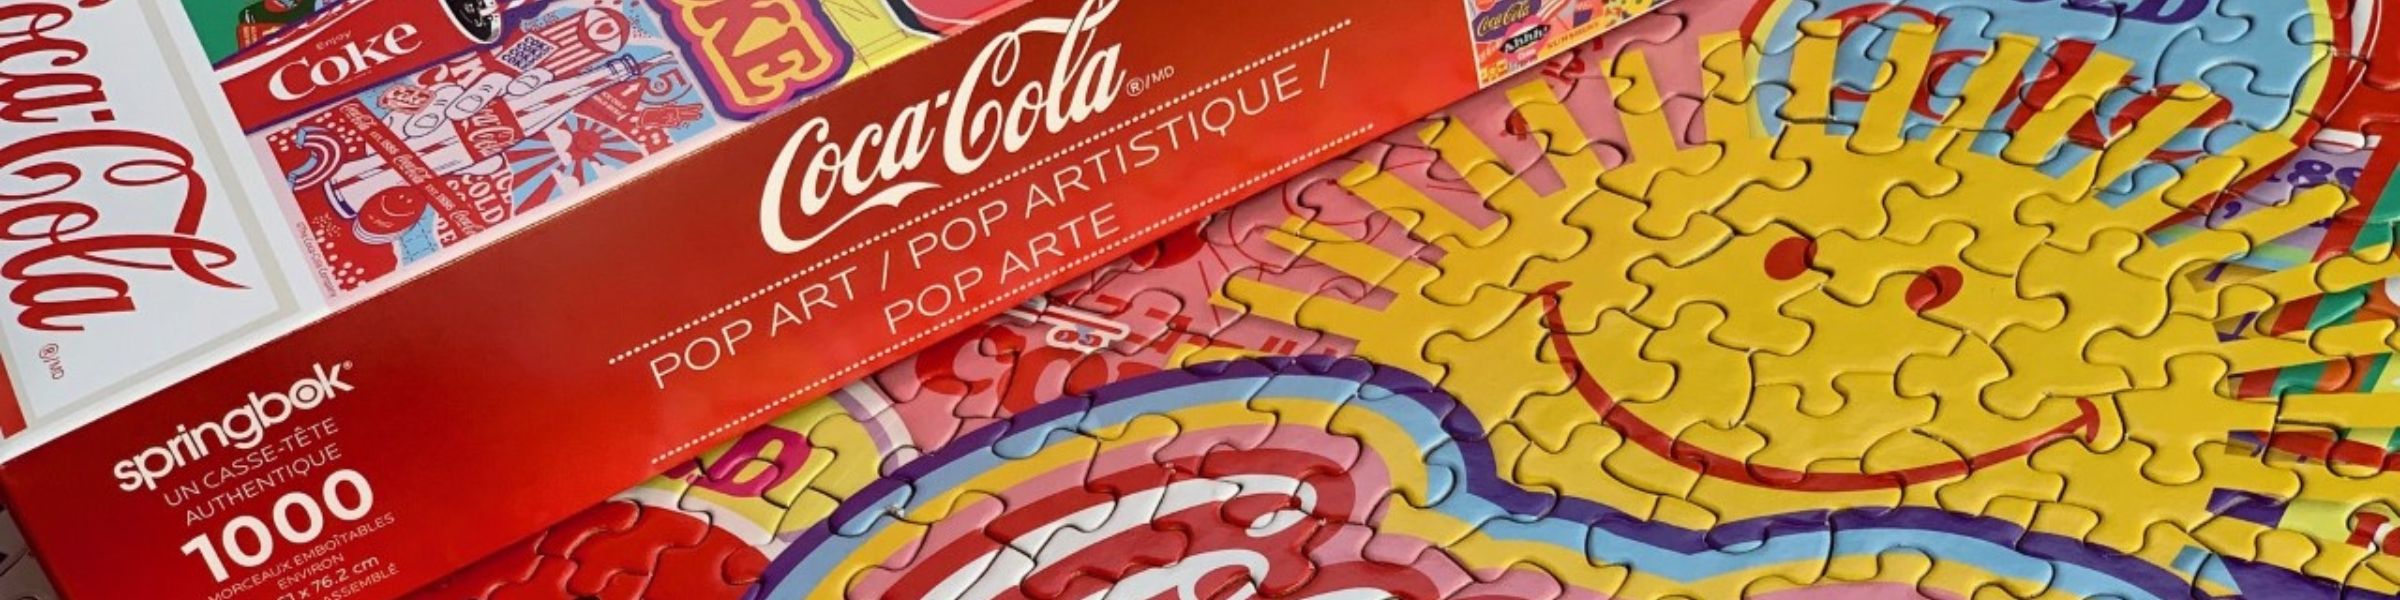 Coca-Cola Puzzles Category Banner